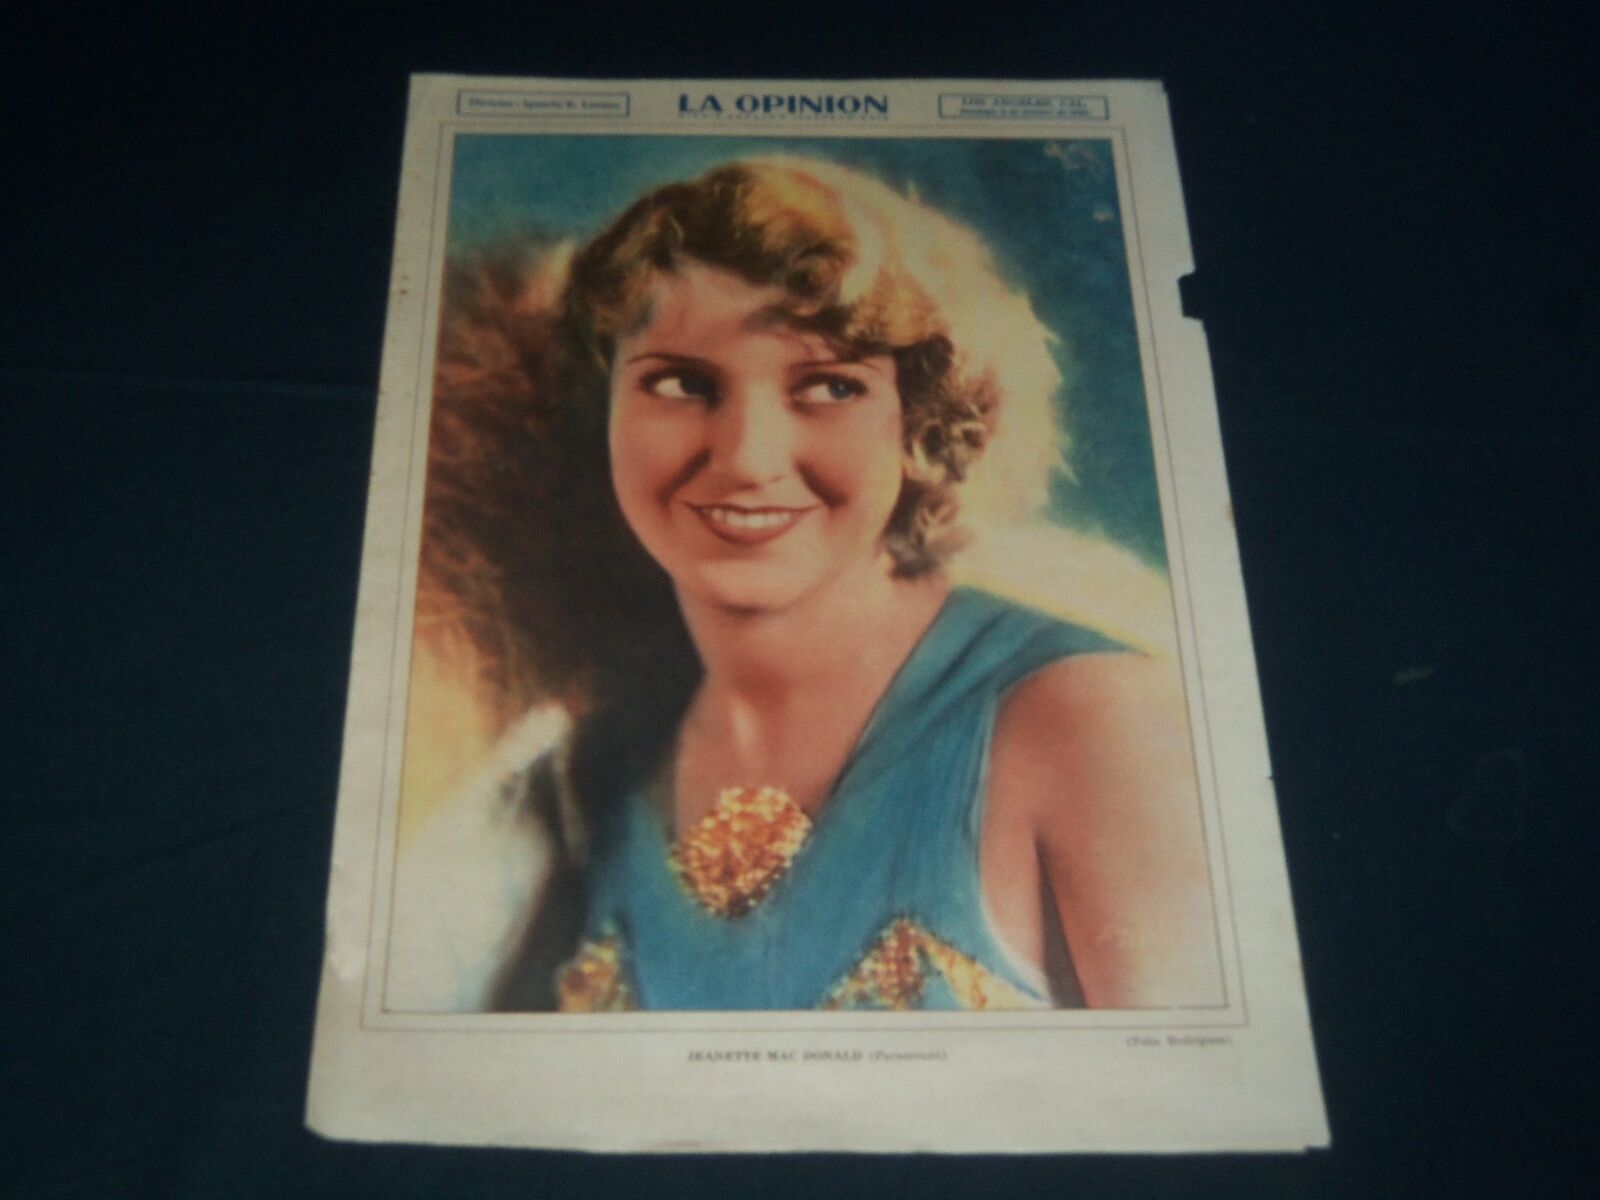 1930 OCTOBER 5 LA OPINION MAGAZINE SECTION - JEANETTE MACDONALD COVER - NP 3818